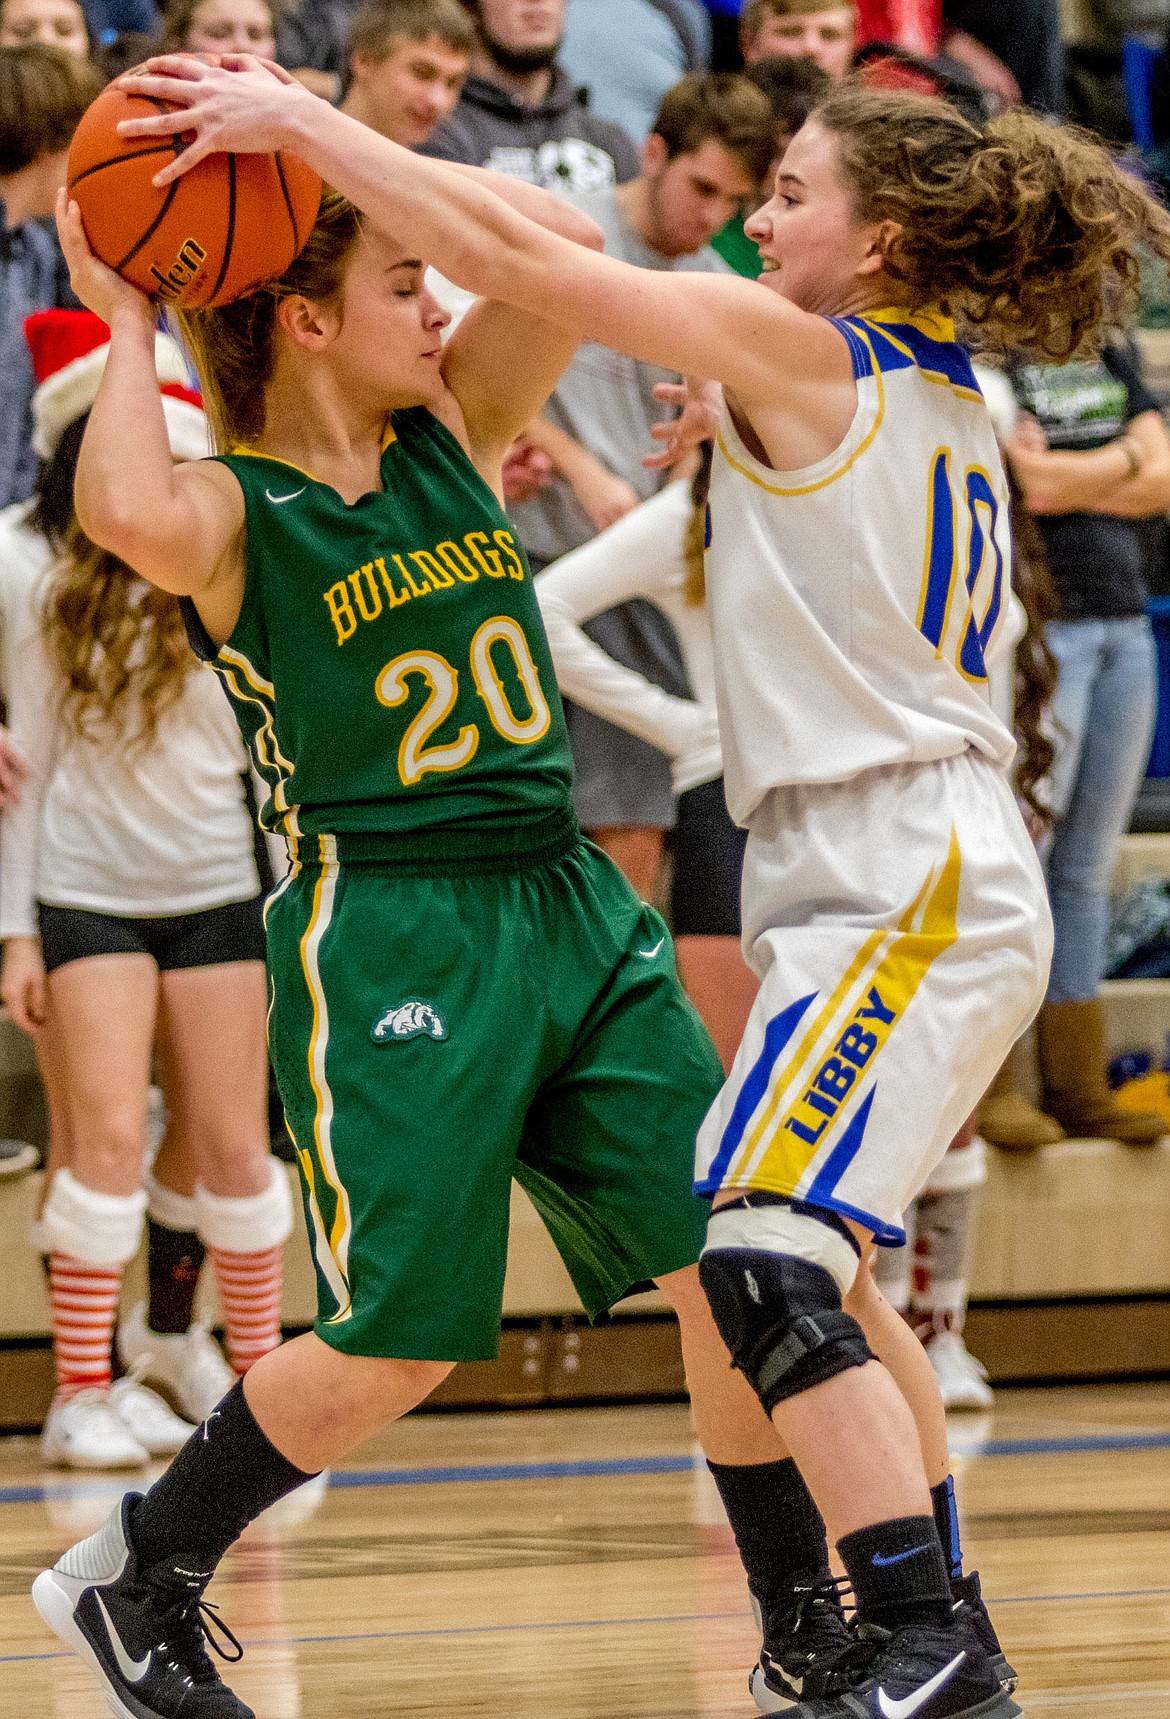 Libby's Emma Gruber disrupts Ashton Ramsey of Whitefish in Thursday's game in Libby. (John Blodgett/The Western News)